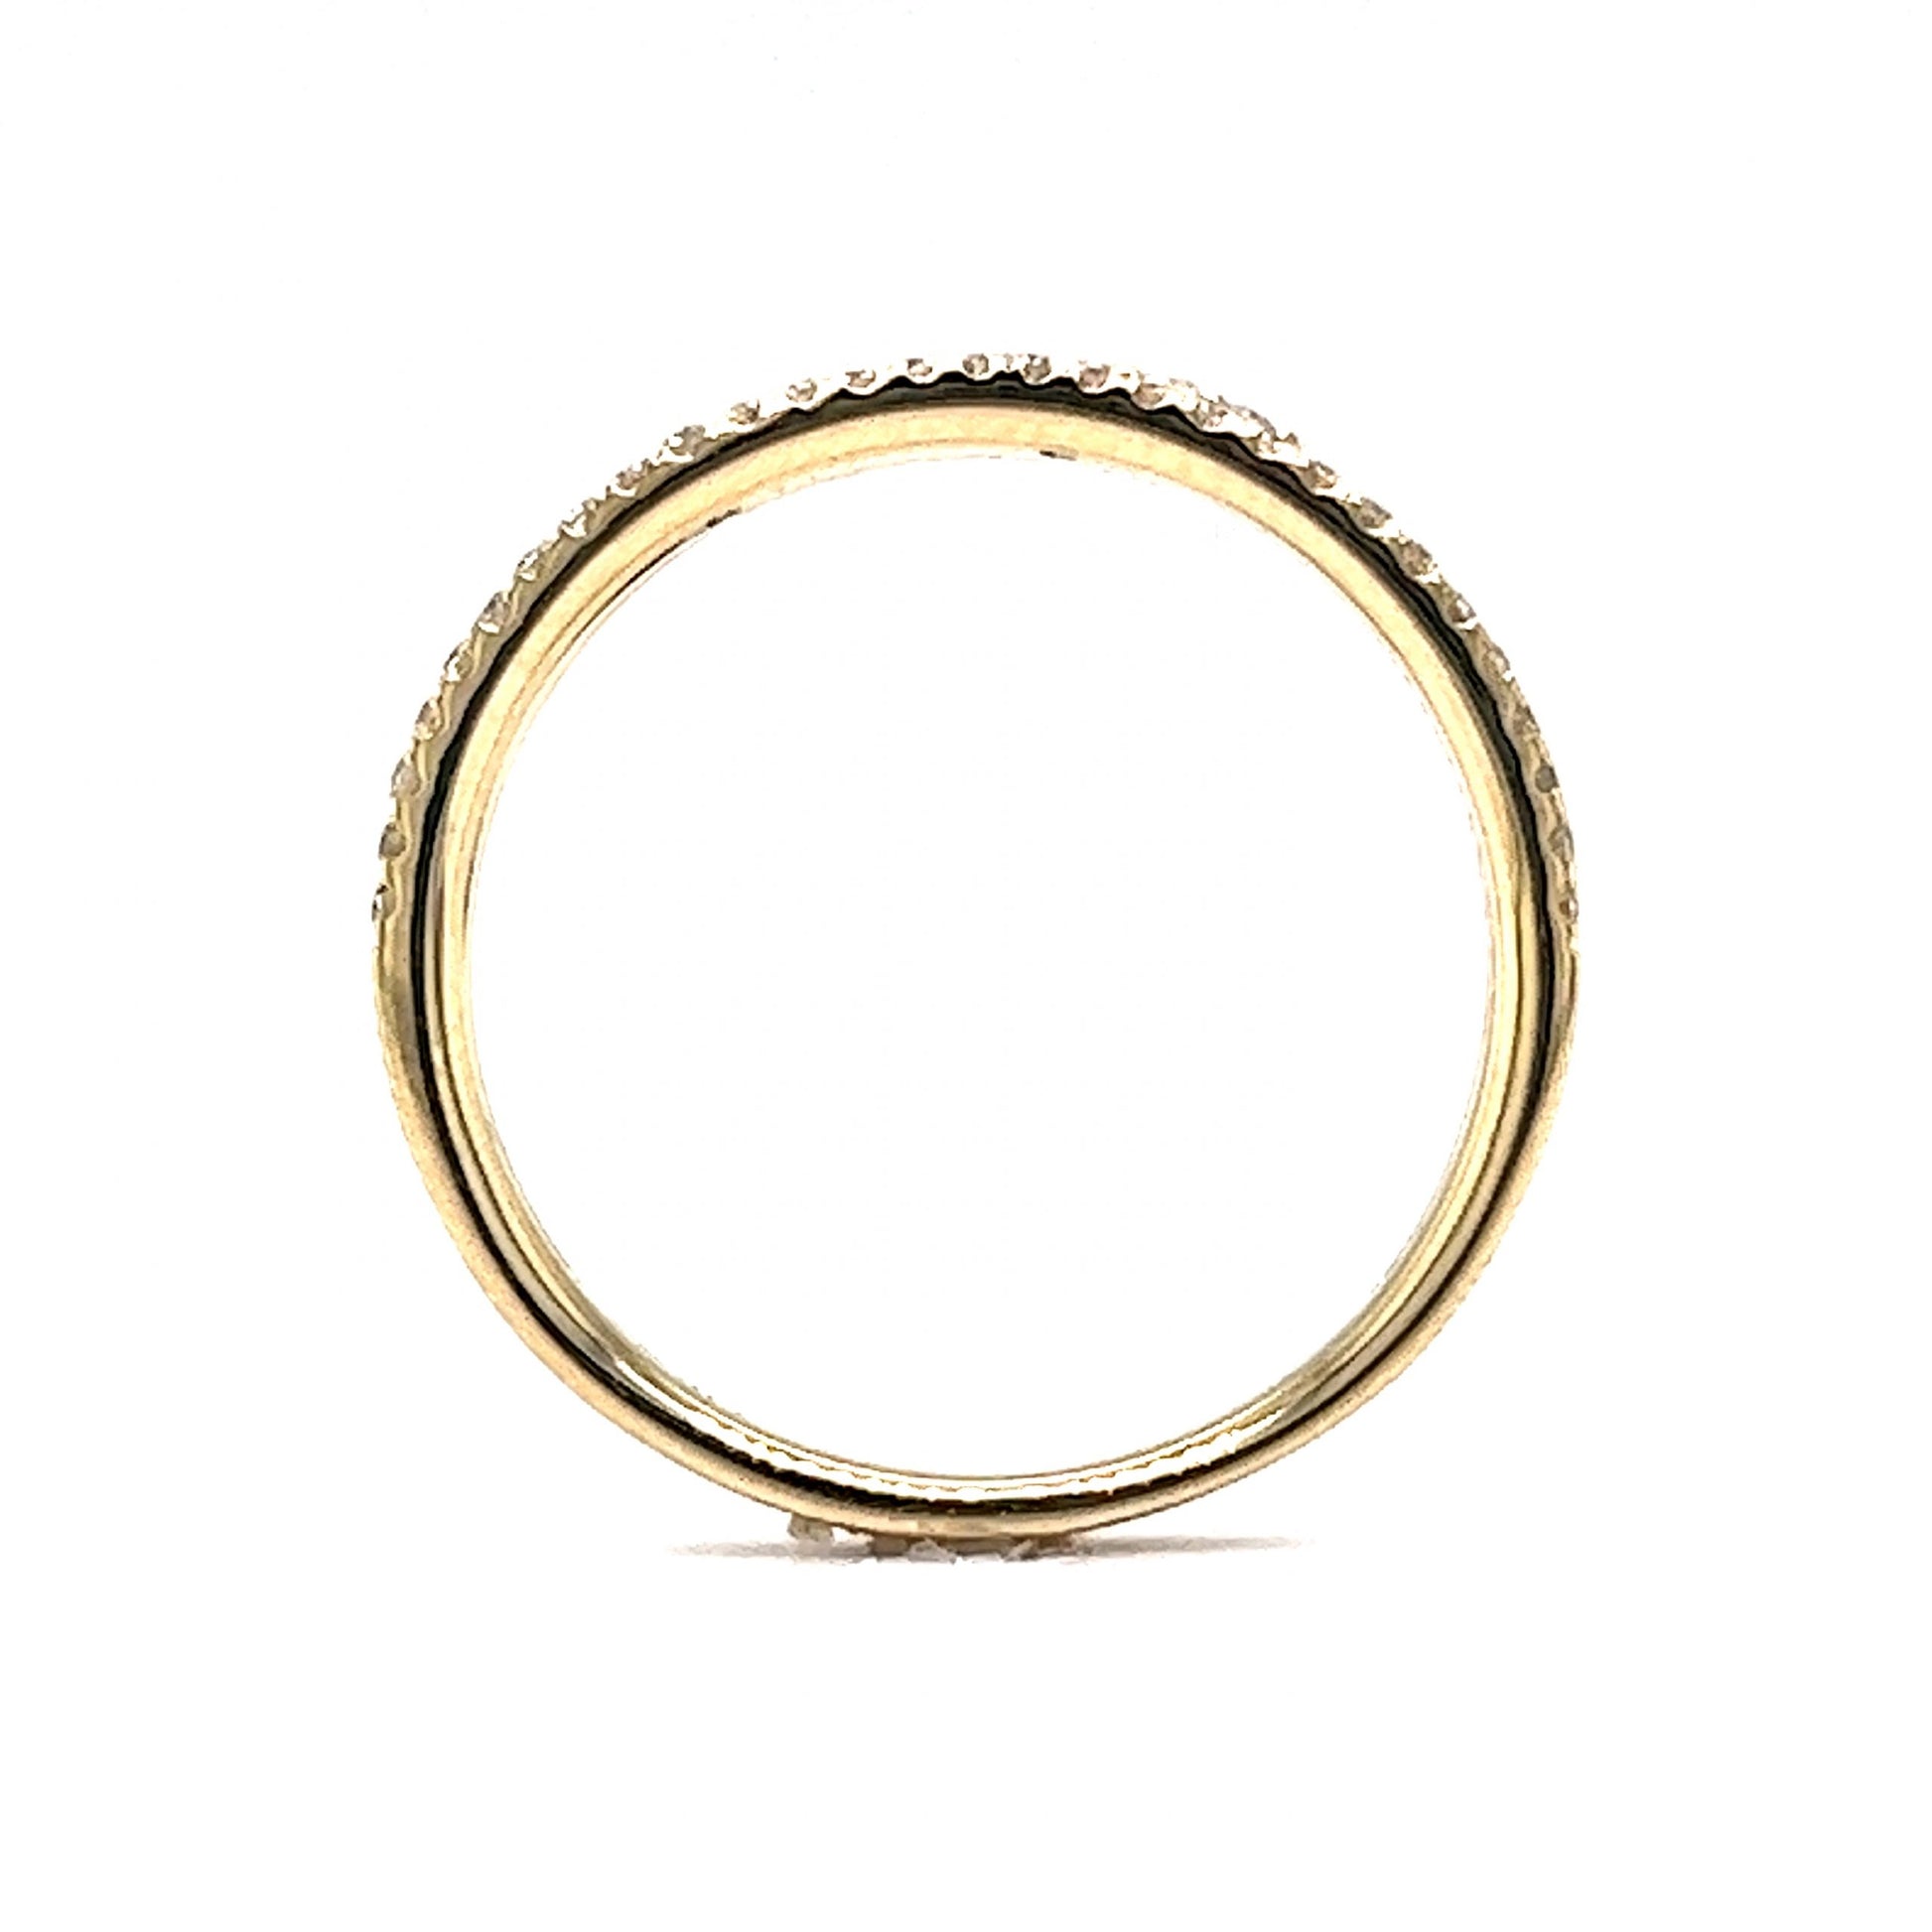 Double Band Pave Diamond Stacking Ring in 14k Yellow Gold